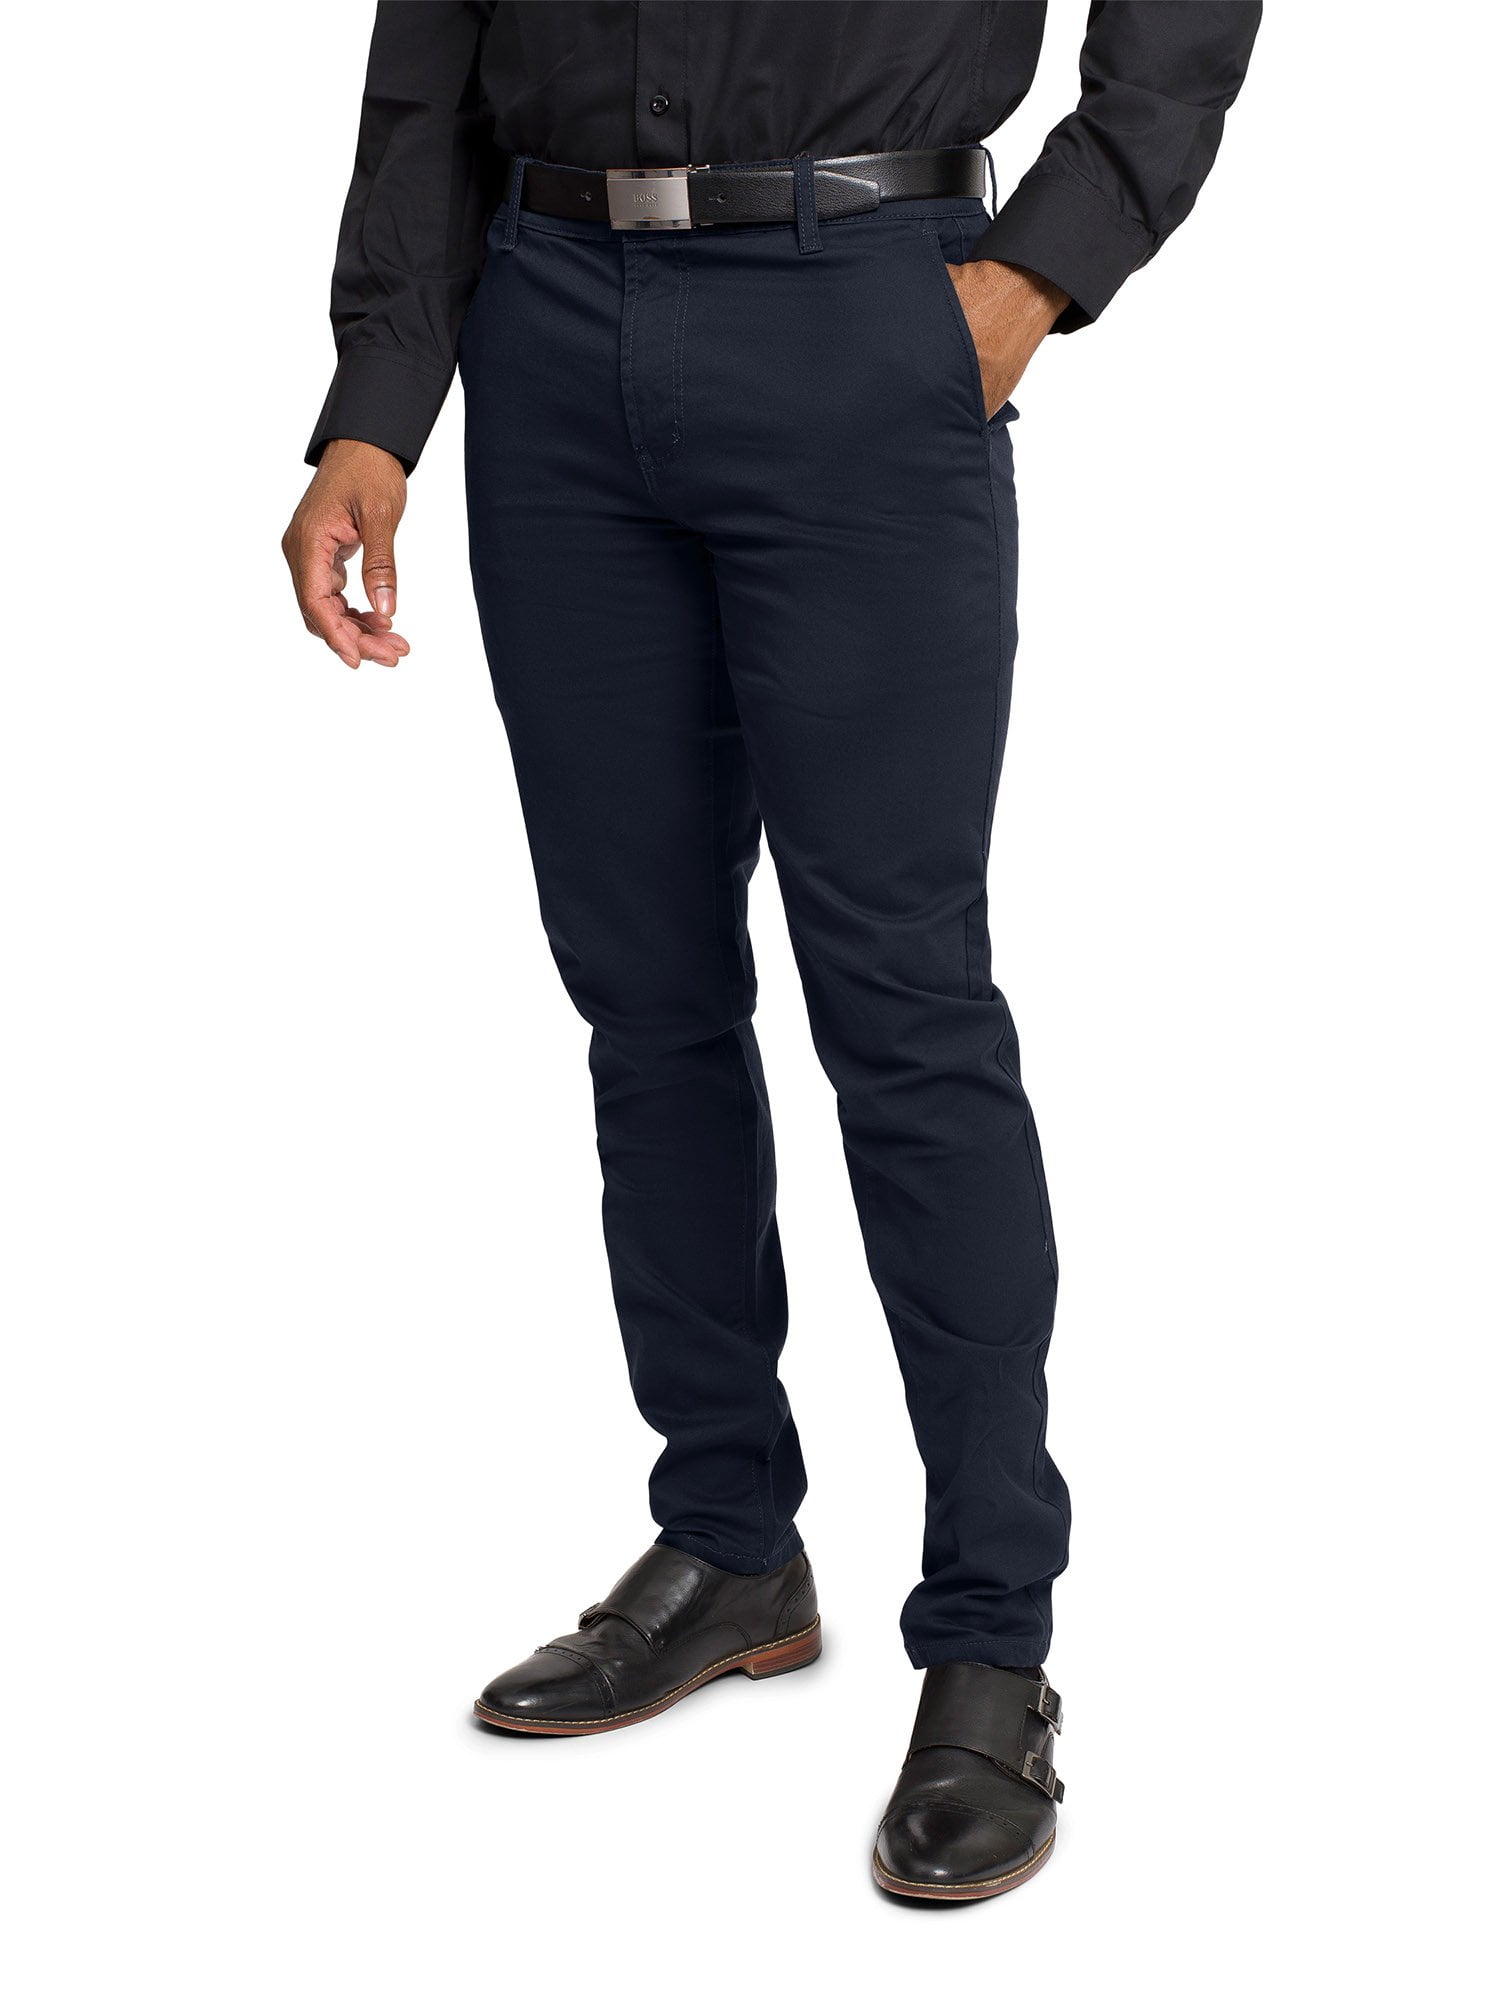 Slacks and Chinos Casual trousers and trousers for Men Obvious Basic Synthetic Trouser in Steel Grey Grey Mens Clothing Trousers 